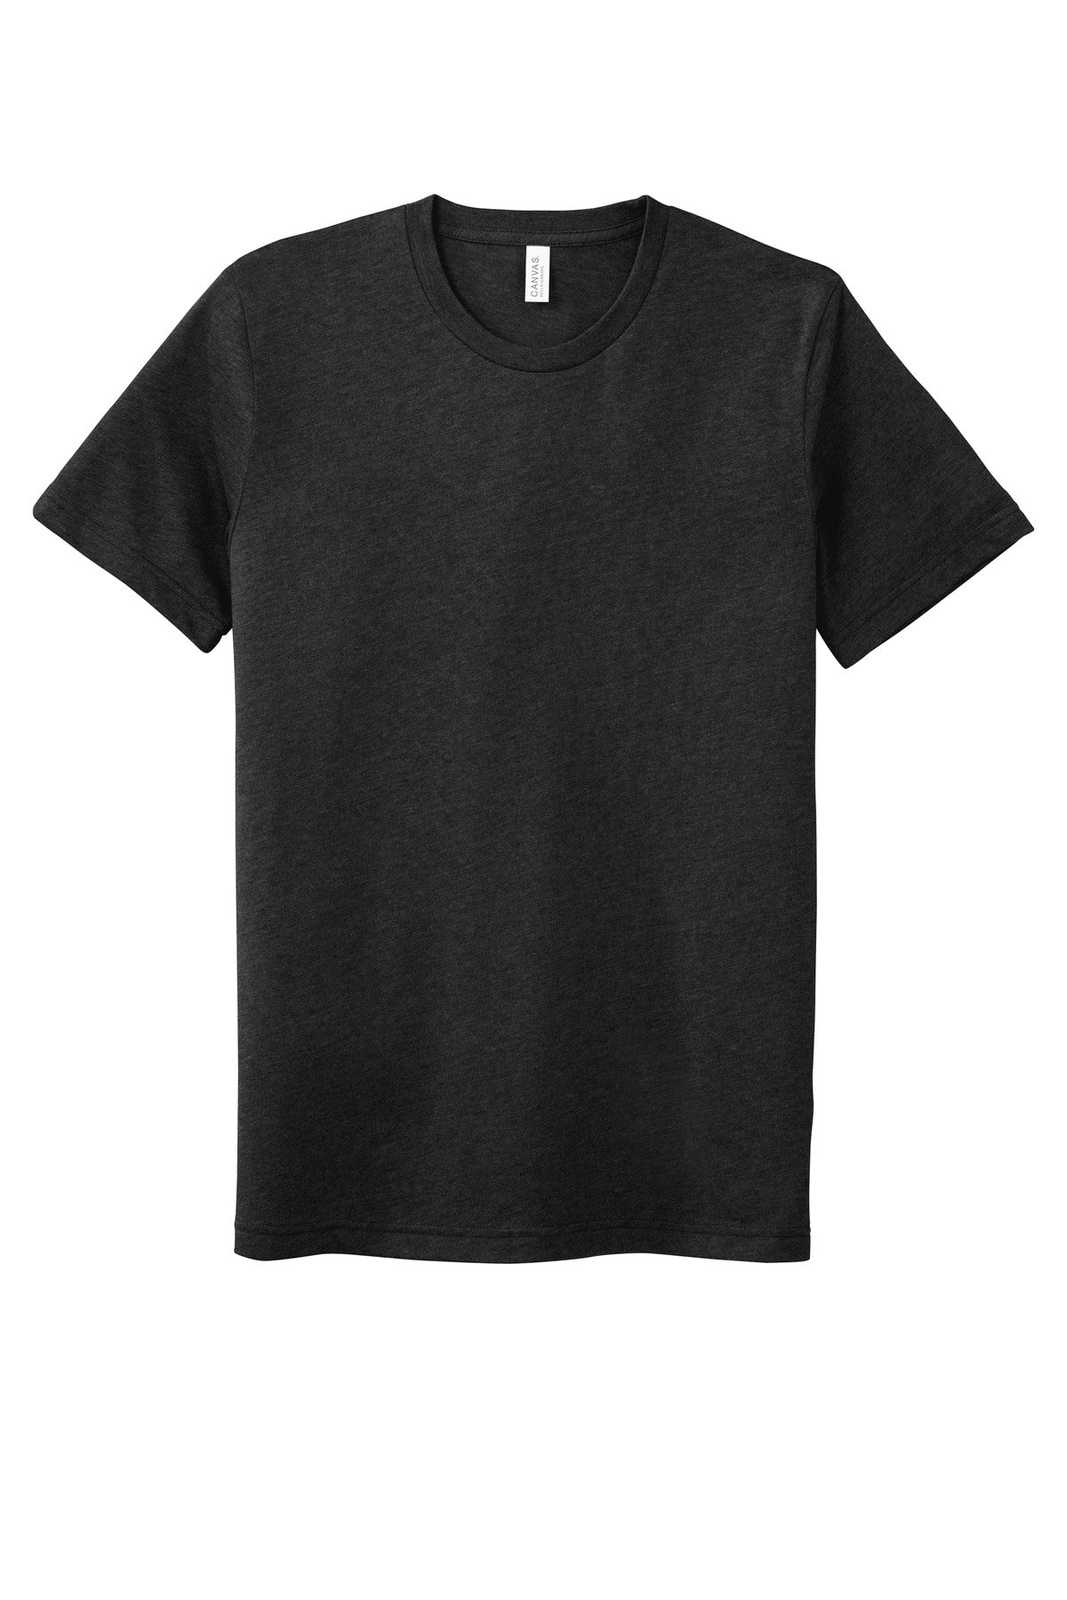 Bella + Canvas 3301 Unisex Sueded Tee - Black Heather - HIT a Double